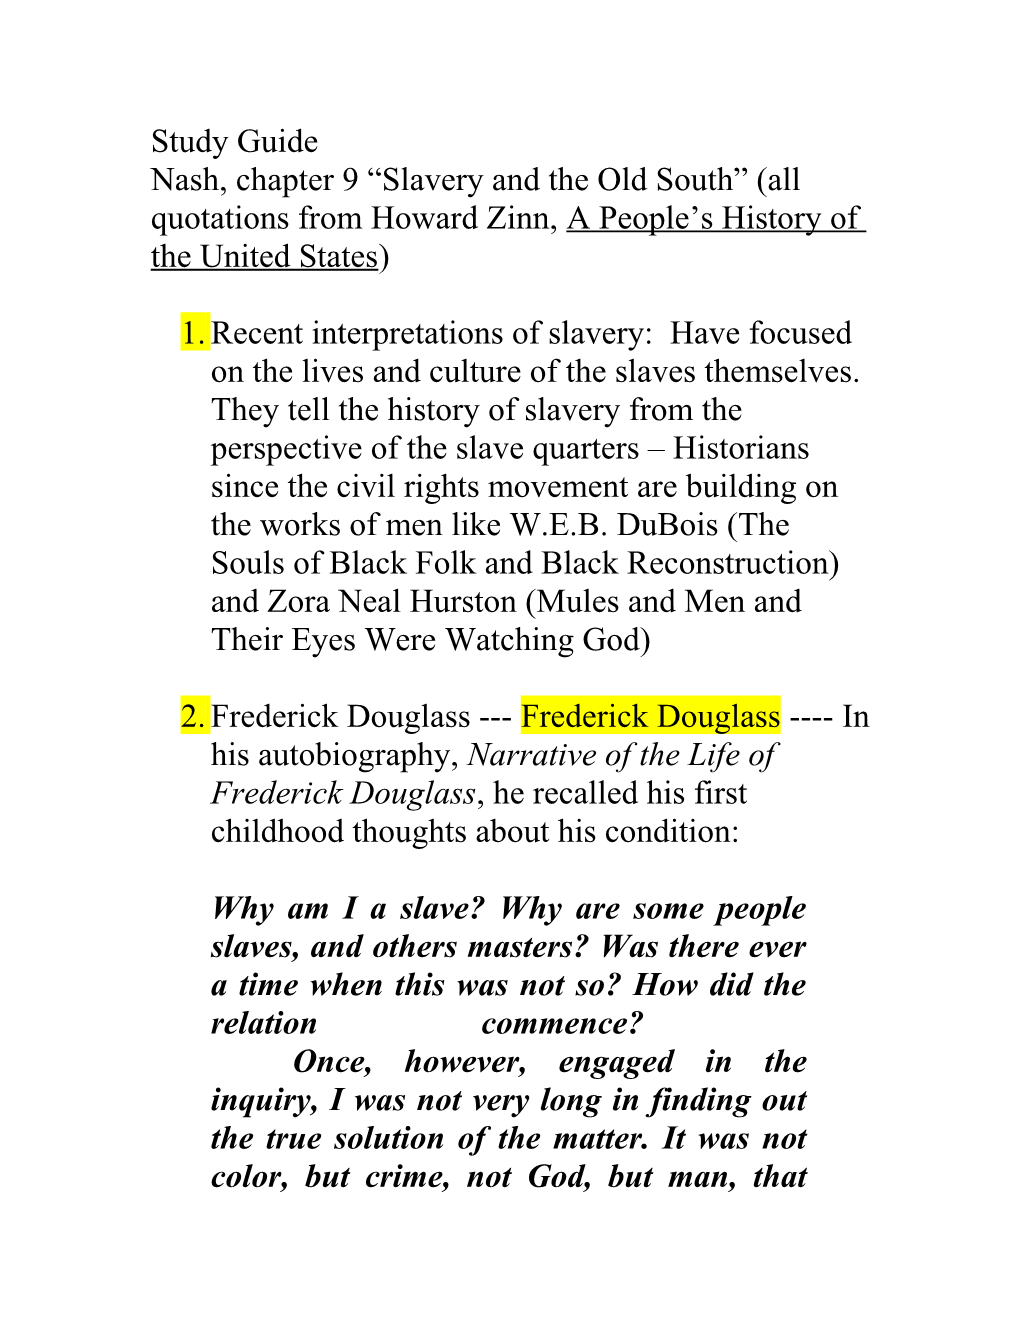 Nash, Chapter 9 Slavery and the Old South (All Quotations from Howard Zinn, a People S